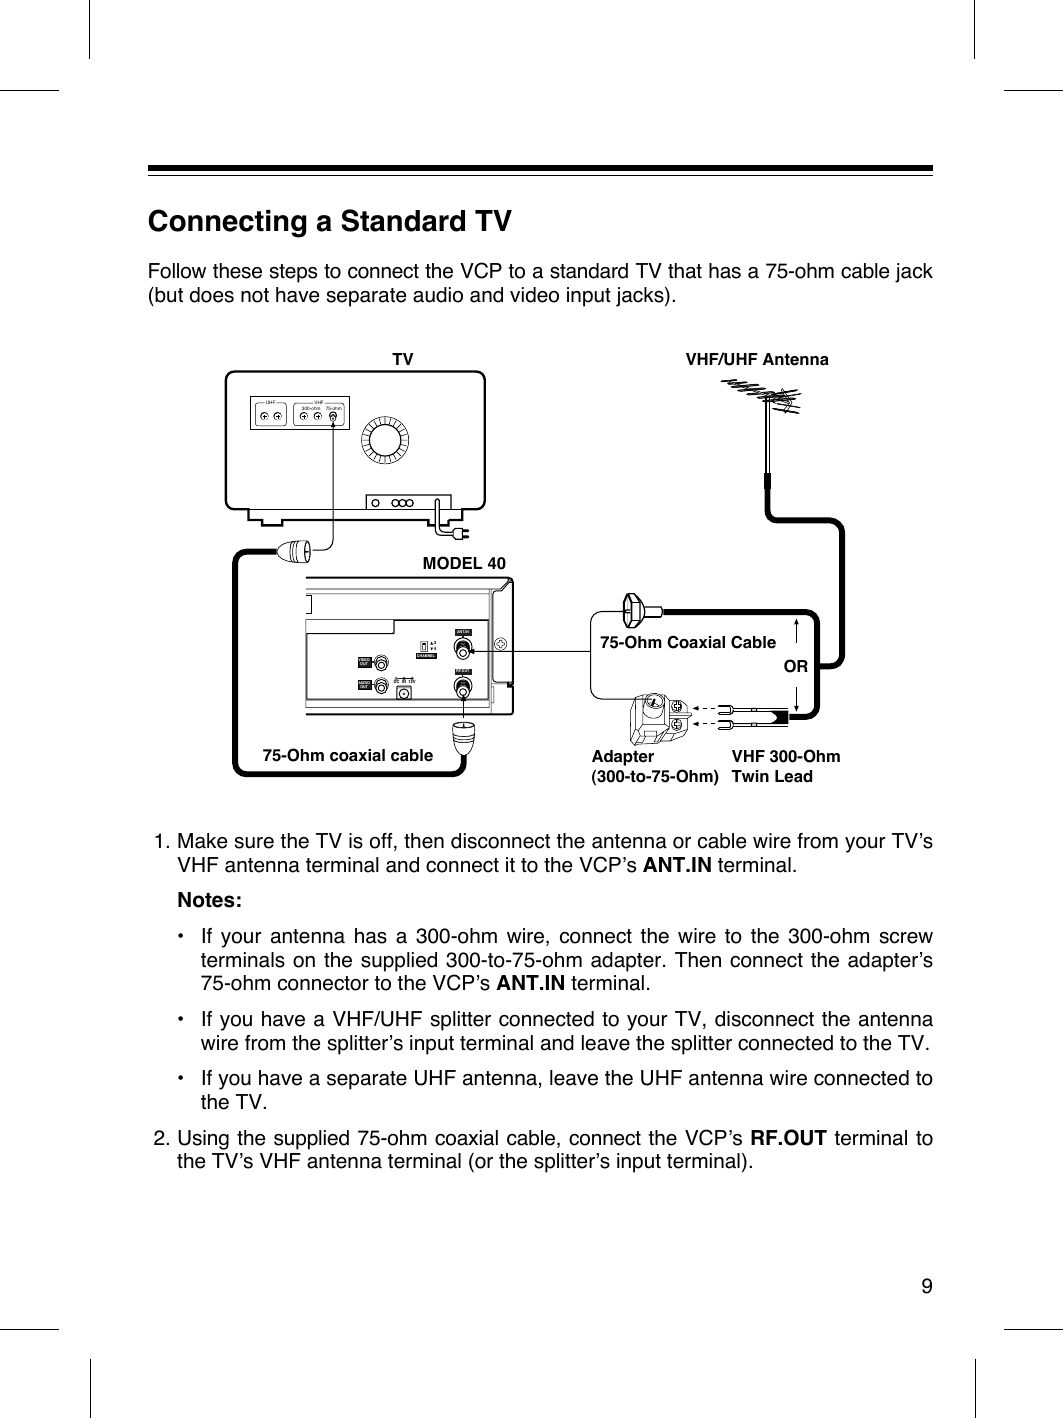 Connecting a Standard TVFollow these steps to connect the VCP to a standard TV that has a 75-ohm cable jack(but does not have separate audio and video input jacks).1. Make sure the TV is off, then disconnect the antenna or cable wire from your TVÕsVHF antenna terminal and connect it to the VCPÕs ANT.IN terminal.Notes:¥ If your antenna has a 300-ohm wire, connect the wire to the 300-ohm screwterminals on the supplied 300-to-75-ohm adapter. Then connect the adapterÕs75-ohm connector to the VCPÕs ANT.IN terminal.¥ If you have a VHF/UHF splitter connected to your TV, disconnect the antennawire from the splitterÕs input terminal and leave the splitter connected to the TV.¥ If you have a separate UHF antenna, leave the UHF antenna wire connected tothe TV.2. Using the supplied 75-ohm coaxial cable, connect the VCPÕs RF.OUT terminal tothe TVÕs VHF antenna terminal (or the splitterÕs input terminal).93DC  IN  12V4CHANNELRF.OUTANT.INVIDEOOUTAUDIOOUT300-ohm 75-ohmUHF VHF75-Ohm coaxial cableMODEL 4075-Ohm Coaxial CableAdapter(300-to-75-Ohm)VHF 300-OhmTwin LeadVHF/UHF AntennaORTV